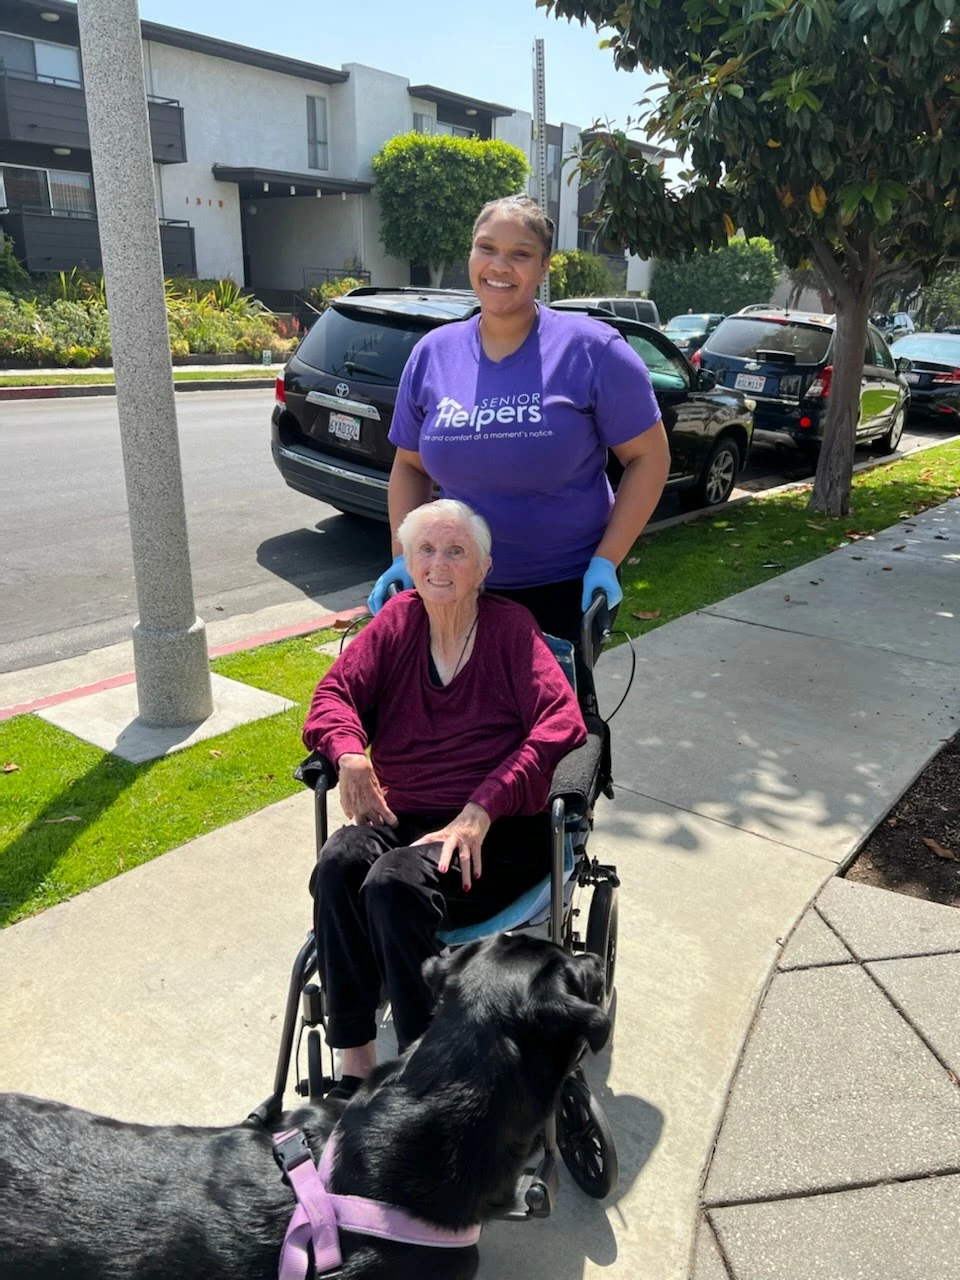 At Senior Helpers, we believe in improving the Quality of Life for each one of our clients including their fur babies. Meet Mary, Adriyanna, and Lollipop who are taking a stroll around the neighborhood to enjoy the California sunshine and fresh air.